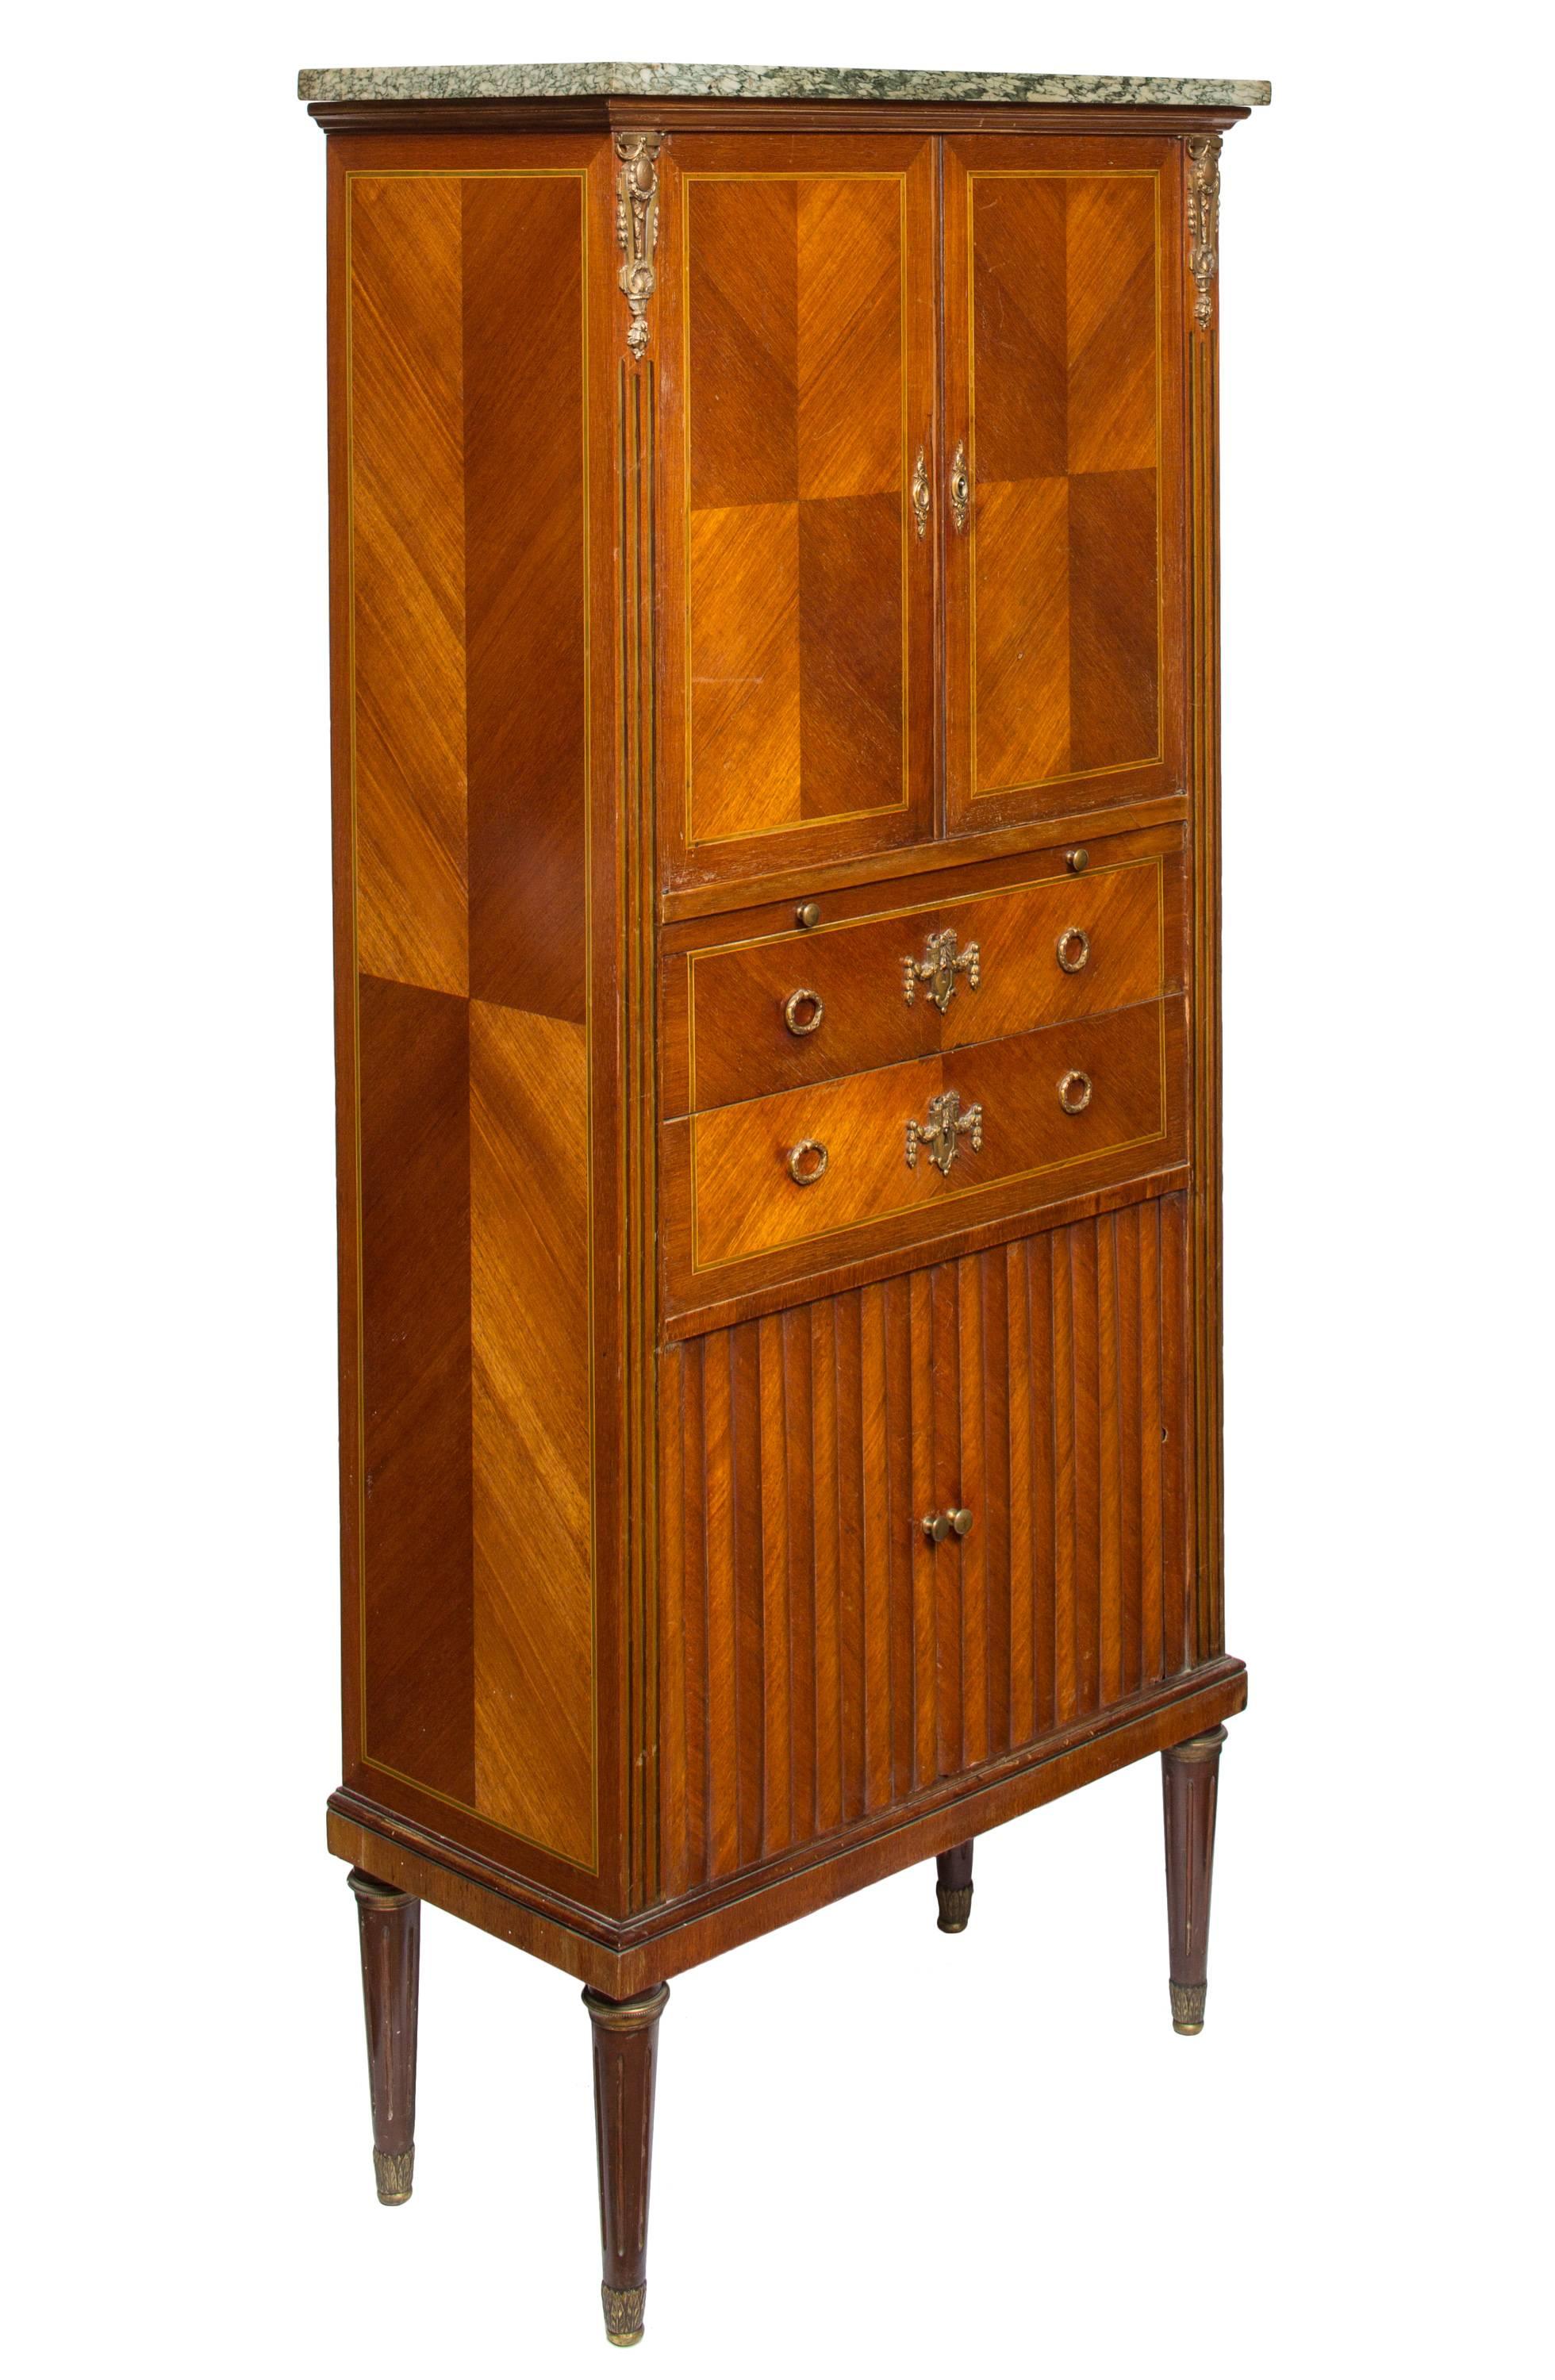 A 19th century, French secretaire with beautiful feathered woodwork, eucalyptus fillet inlay and marble top. The wood grain veneer is artfully arranged in geometric patterns on both front and sides. Featuring a slide-out writing surface at center,